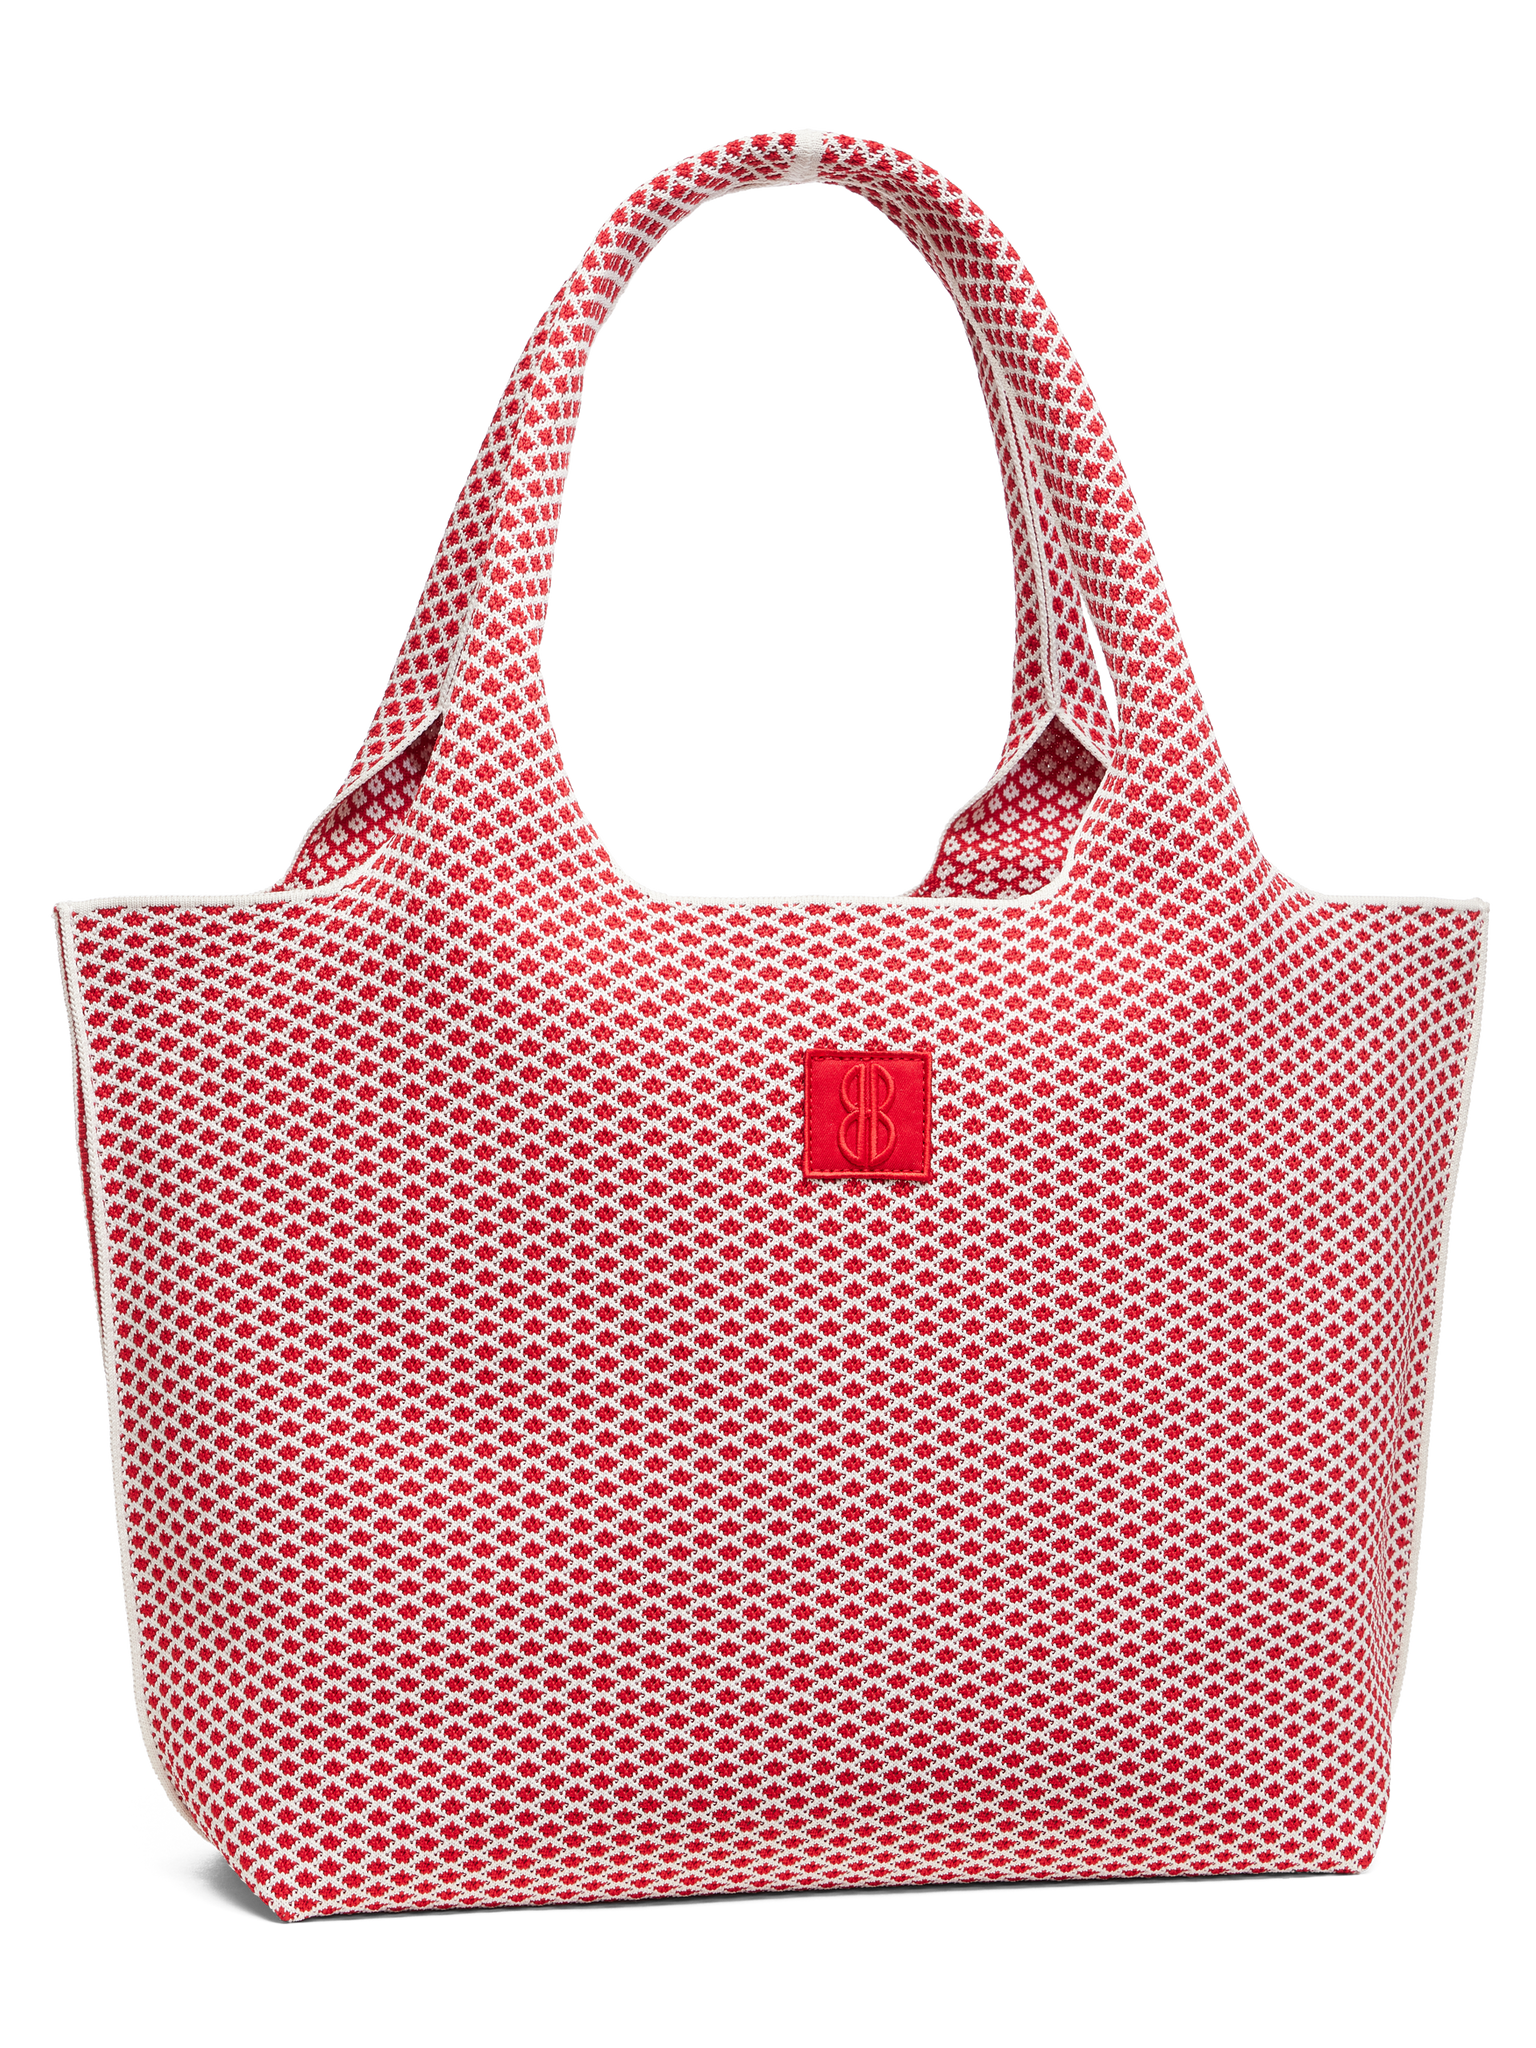 Large - Red Diamond tote with pouch